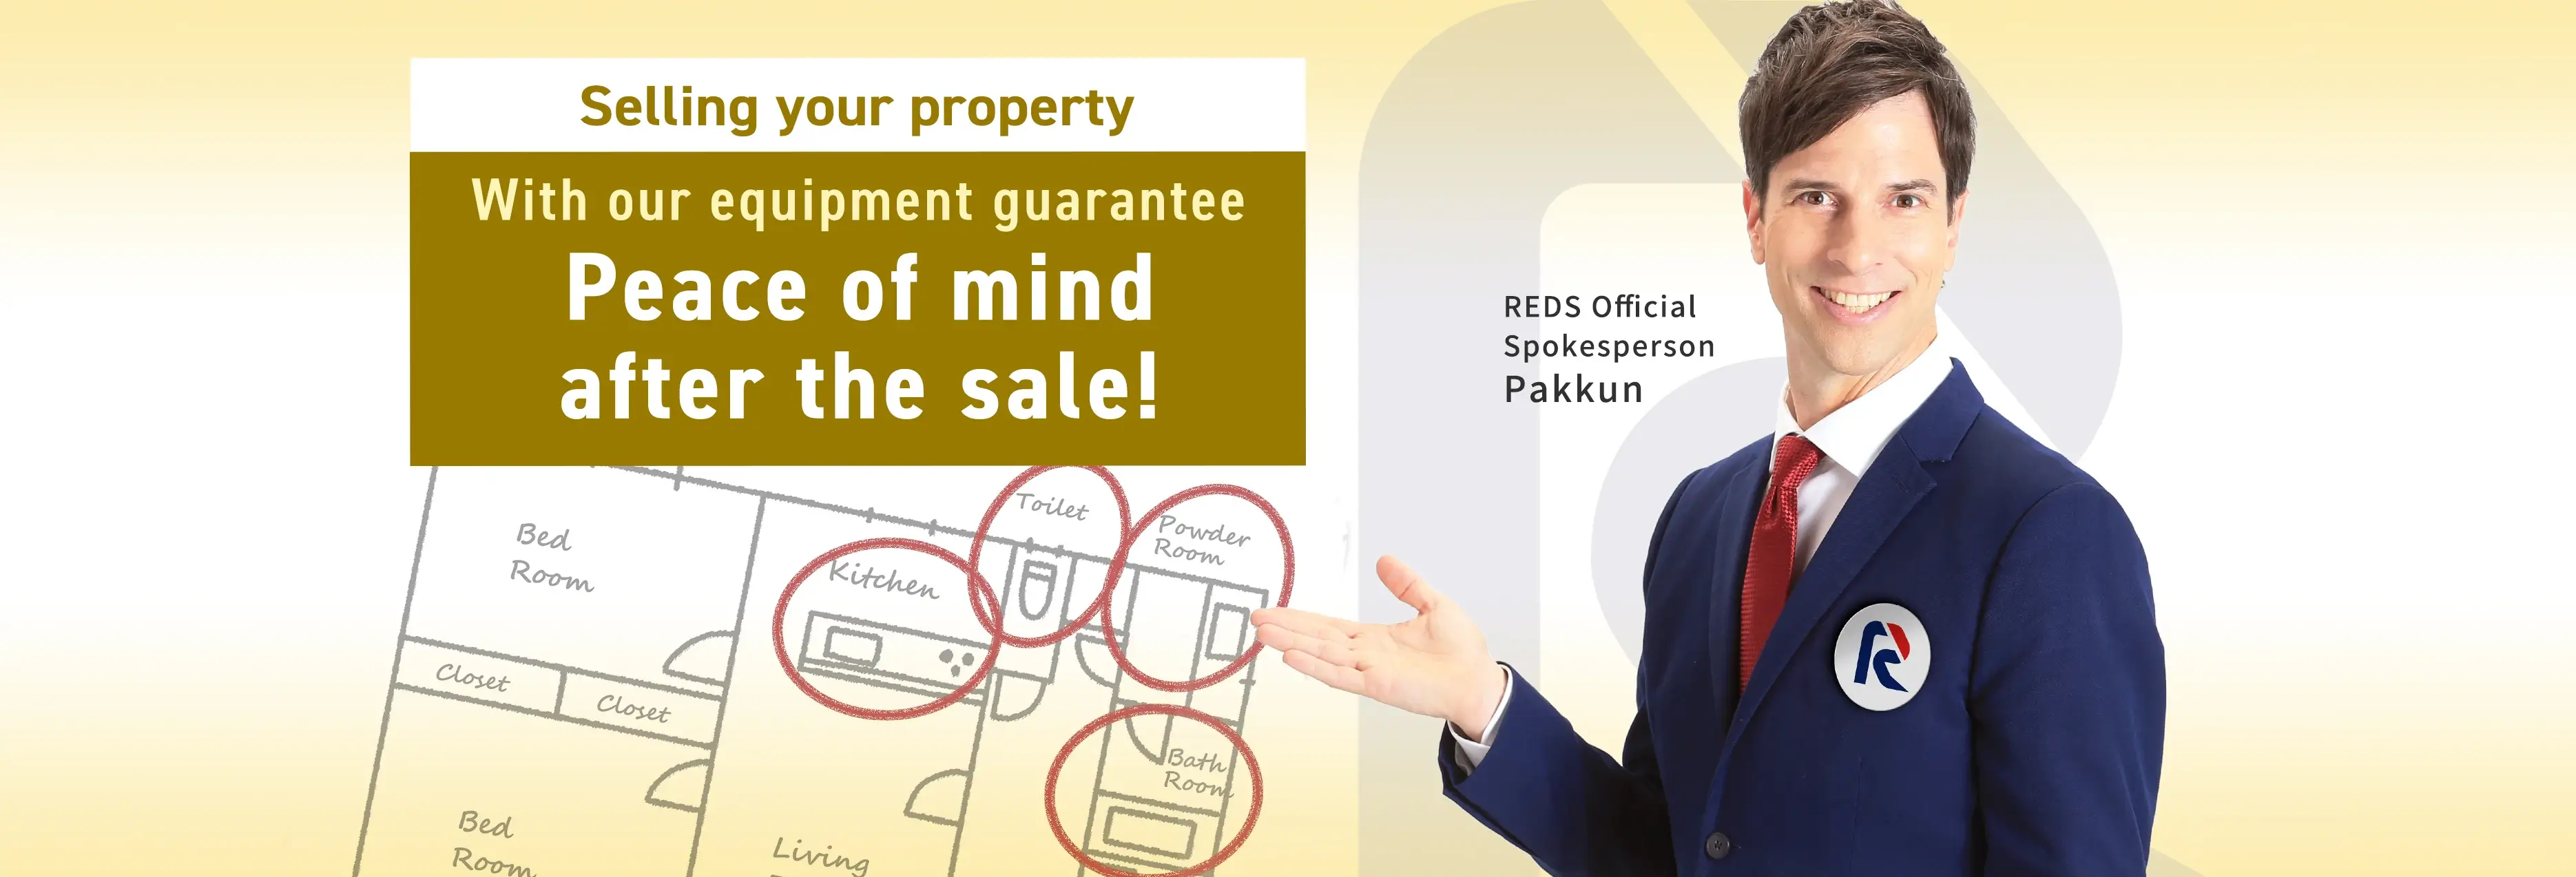 Selling your property With our equipment guarantee Peace of mind after the sale!